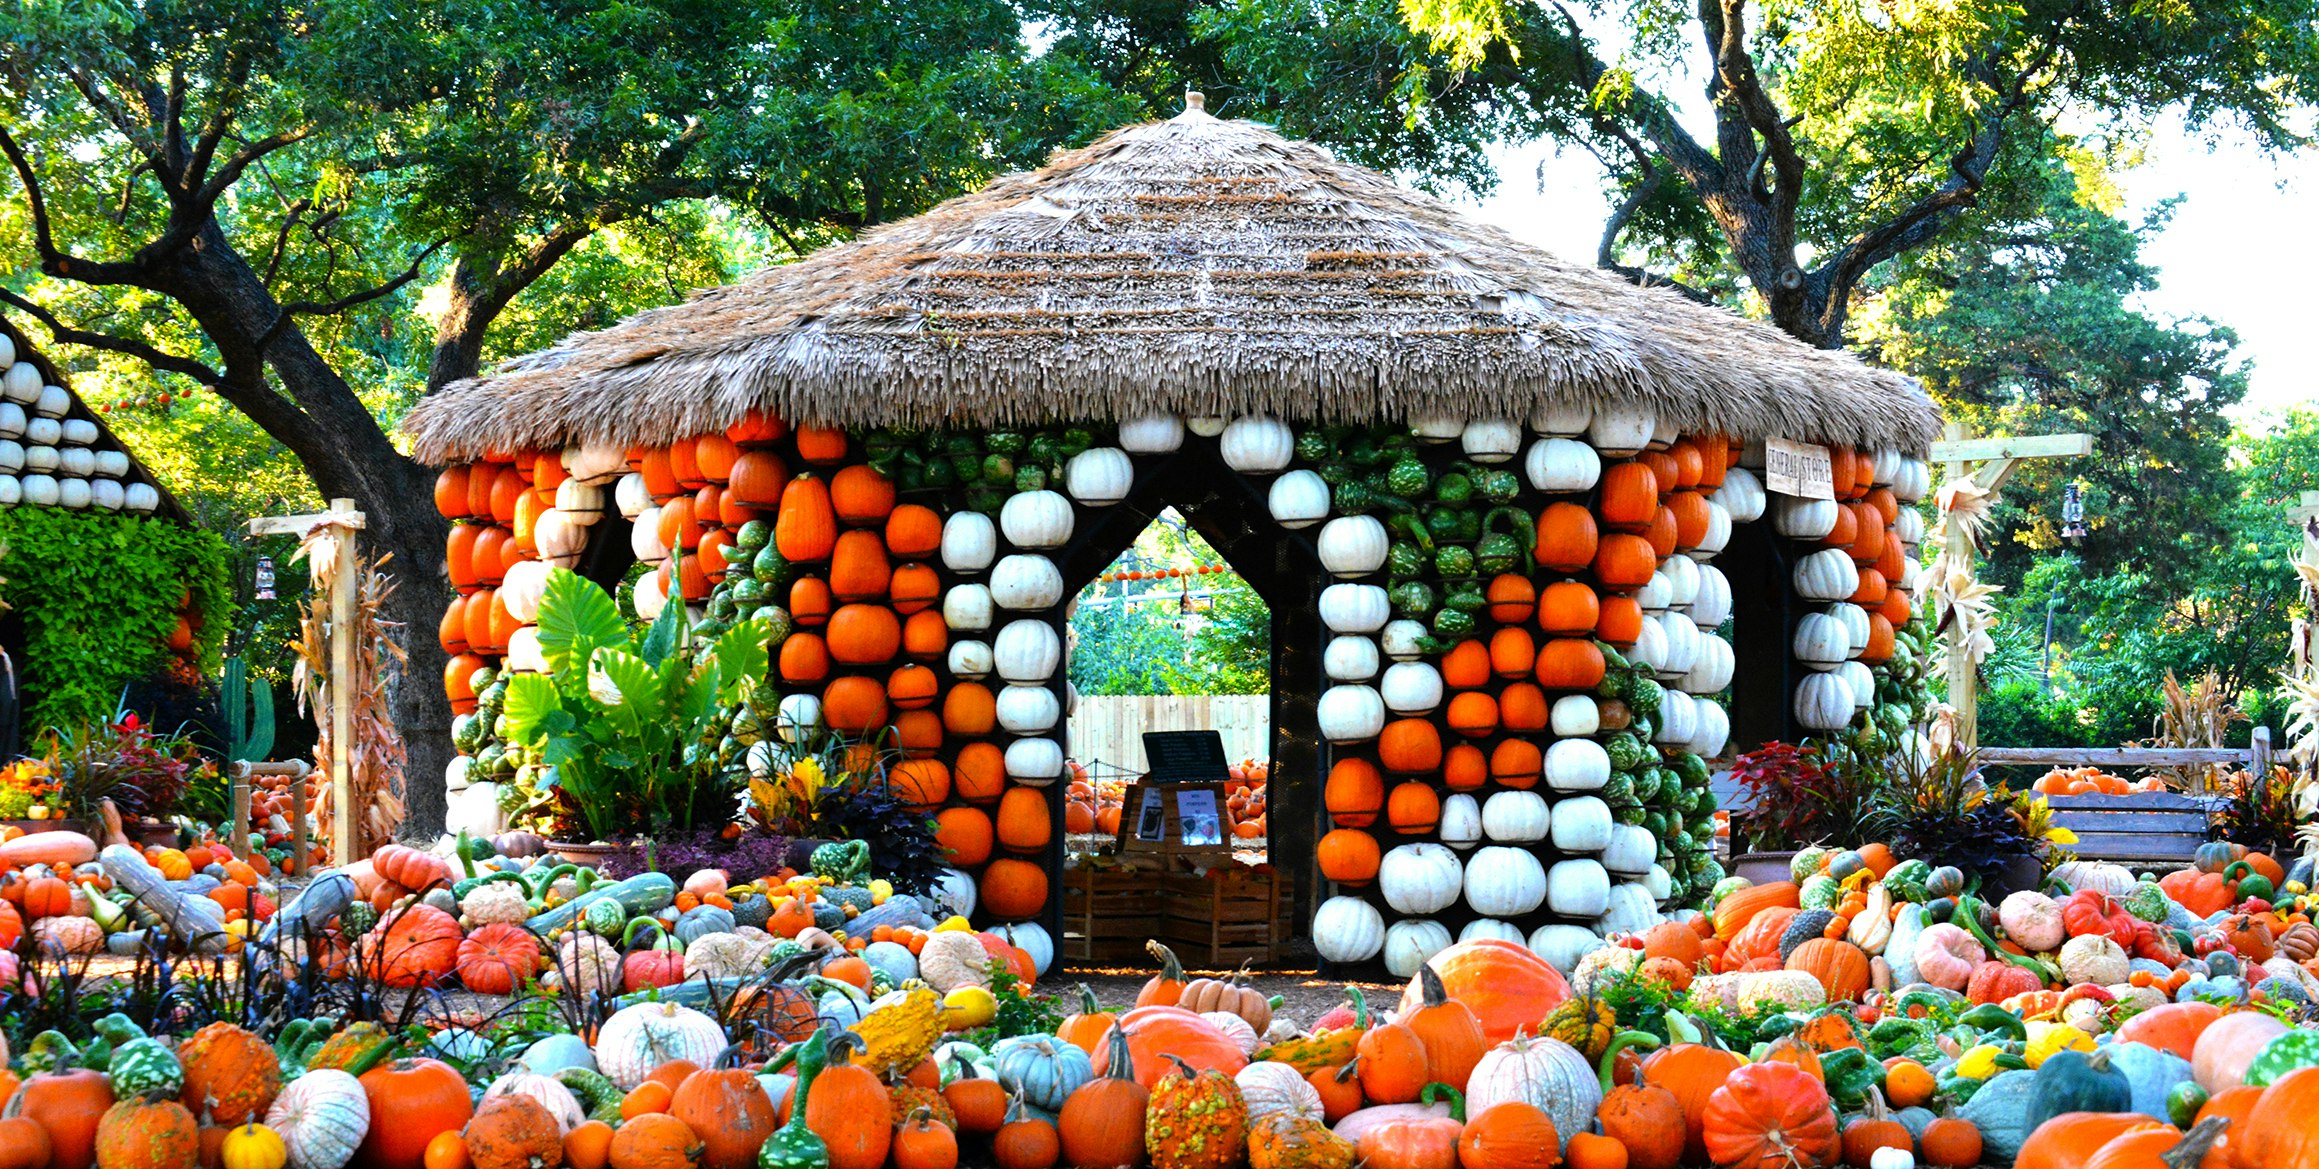 A large collection of pumpkins and squash of varying sizes and colors are placed in front of a thatched-roof hut that's outlined with orange and white pumpkins